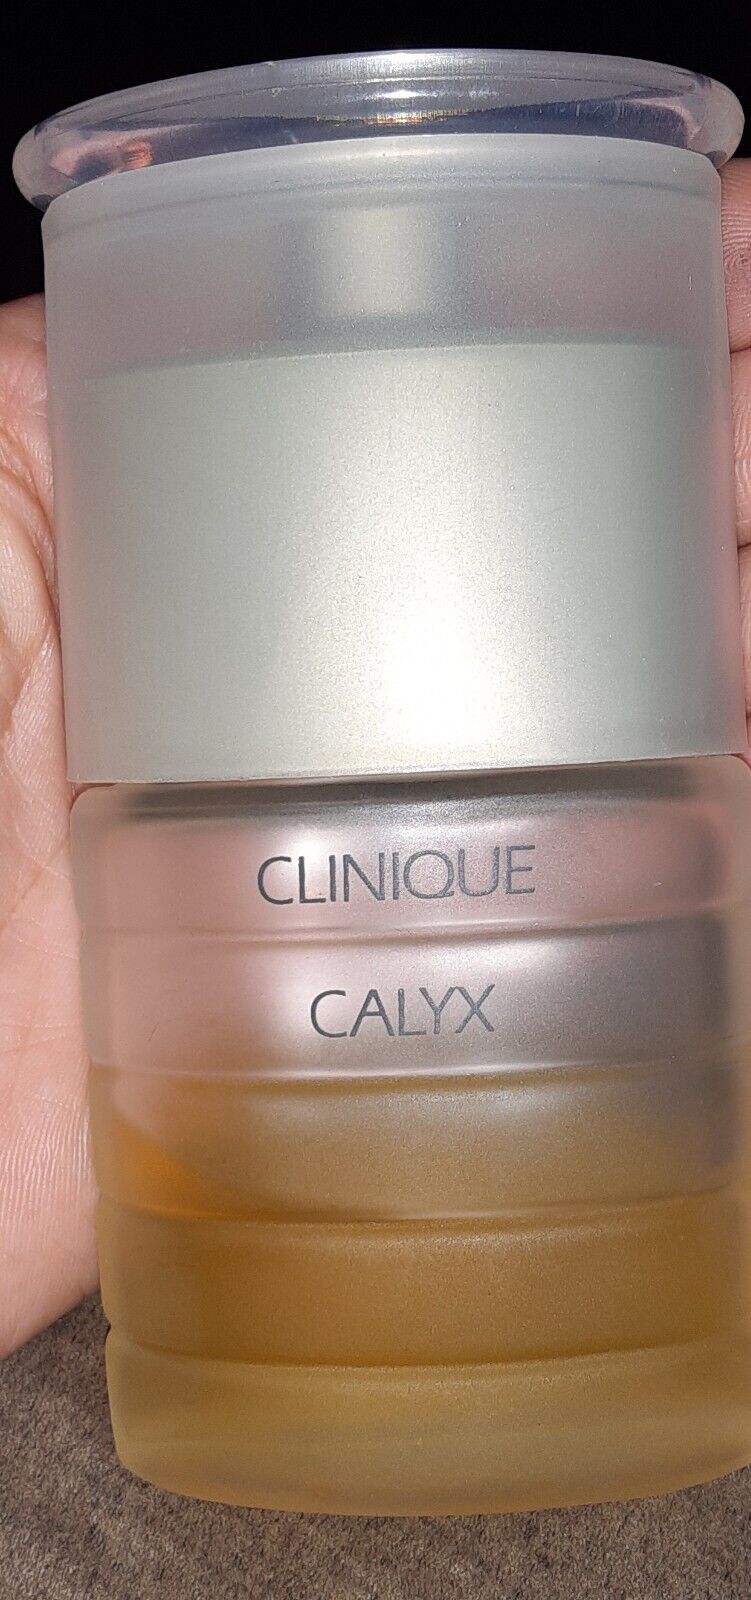 CALYX by CLINIQUE EXHILARATING FRAGRANCE 1.7OZ/50ML VINTAGE 1/2 Full